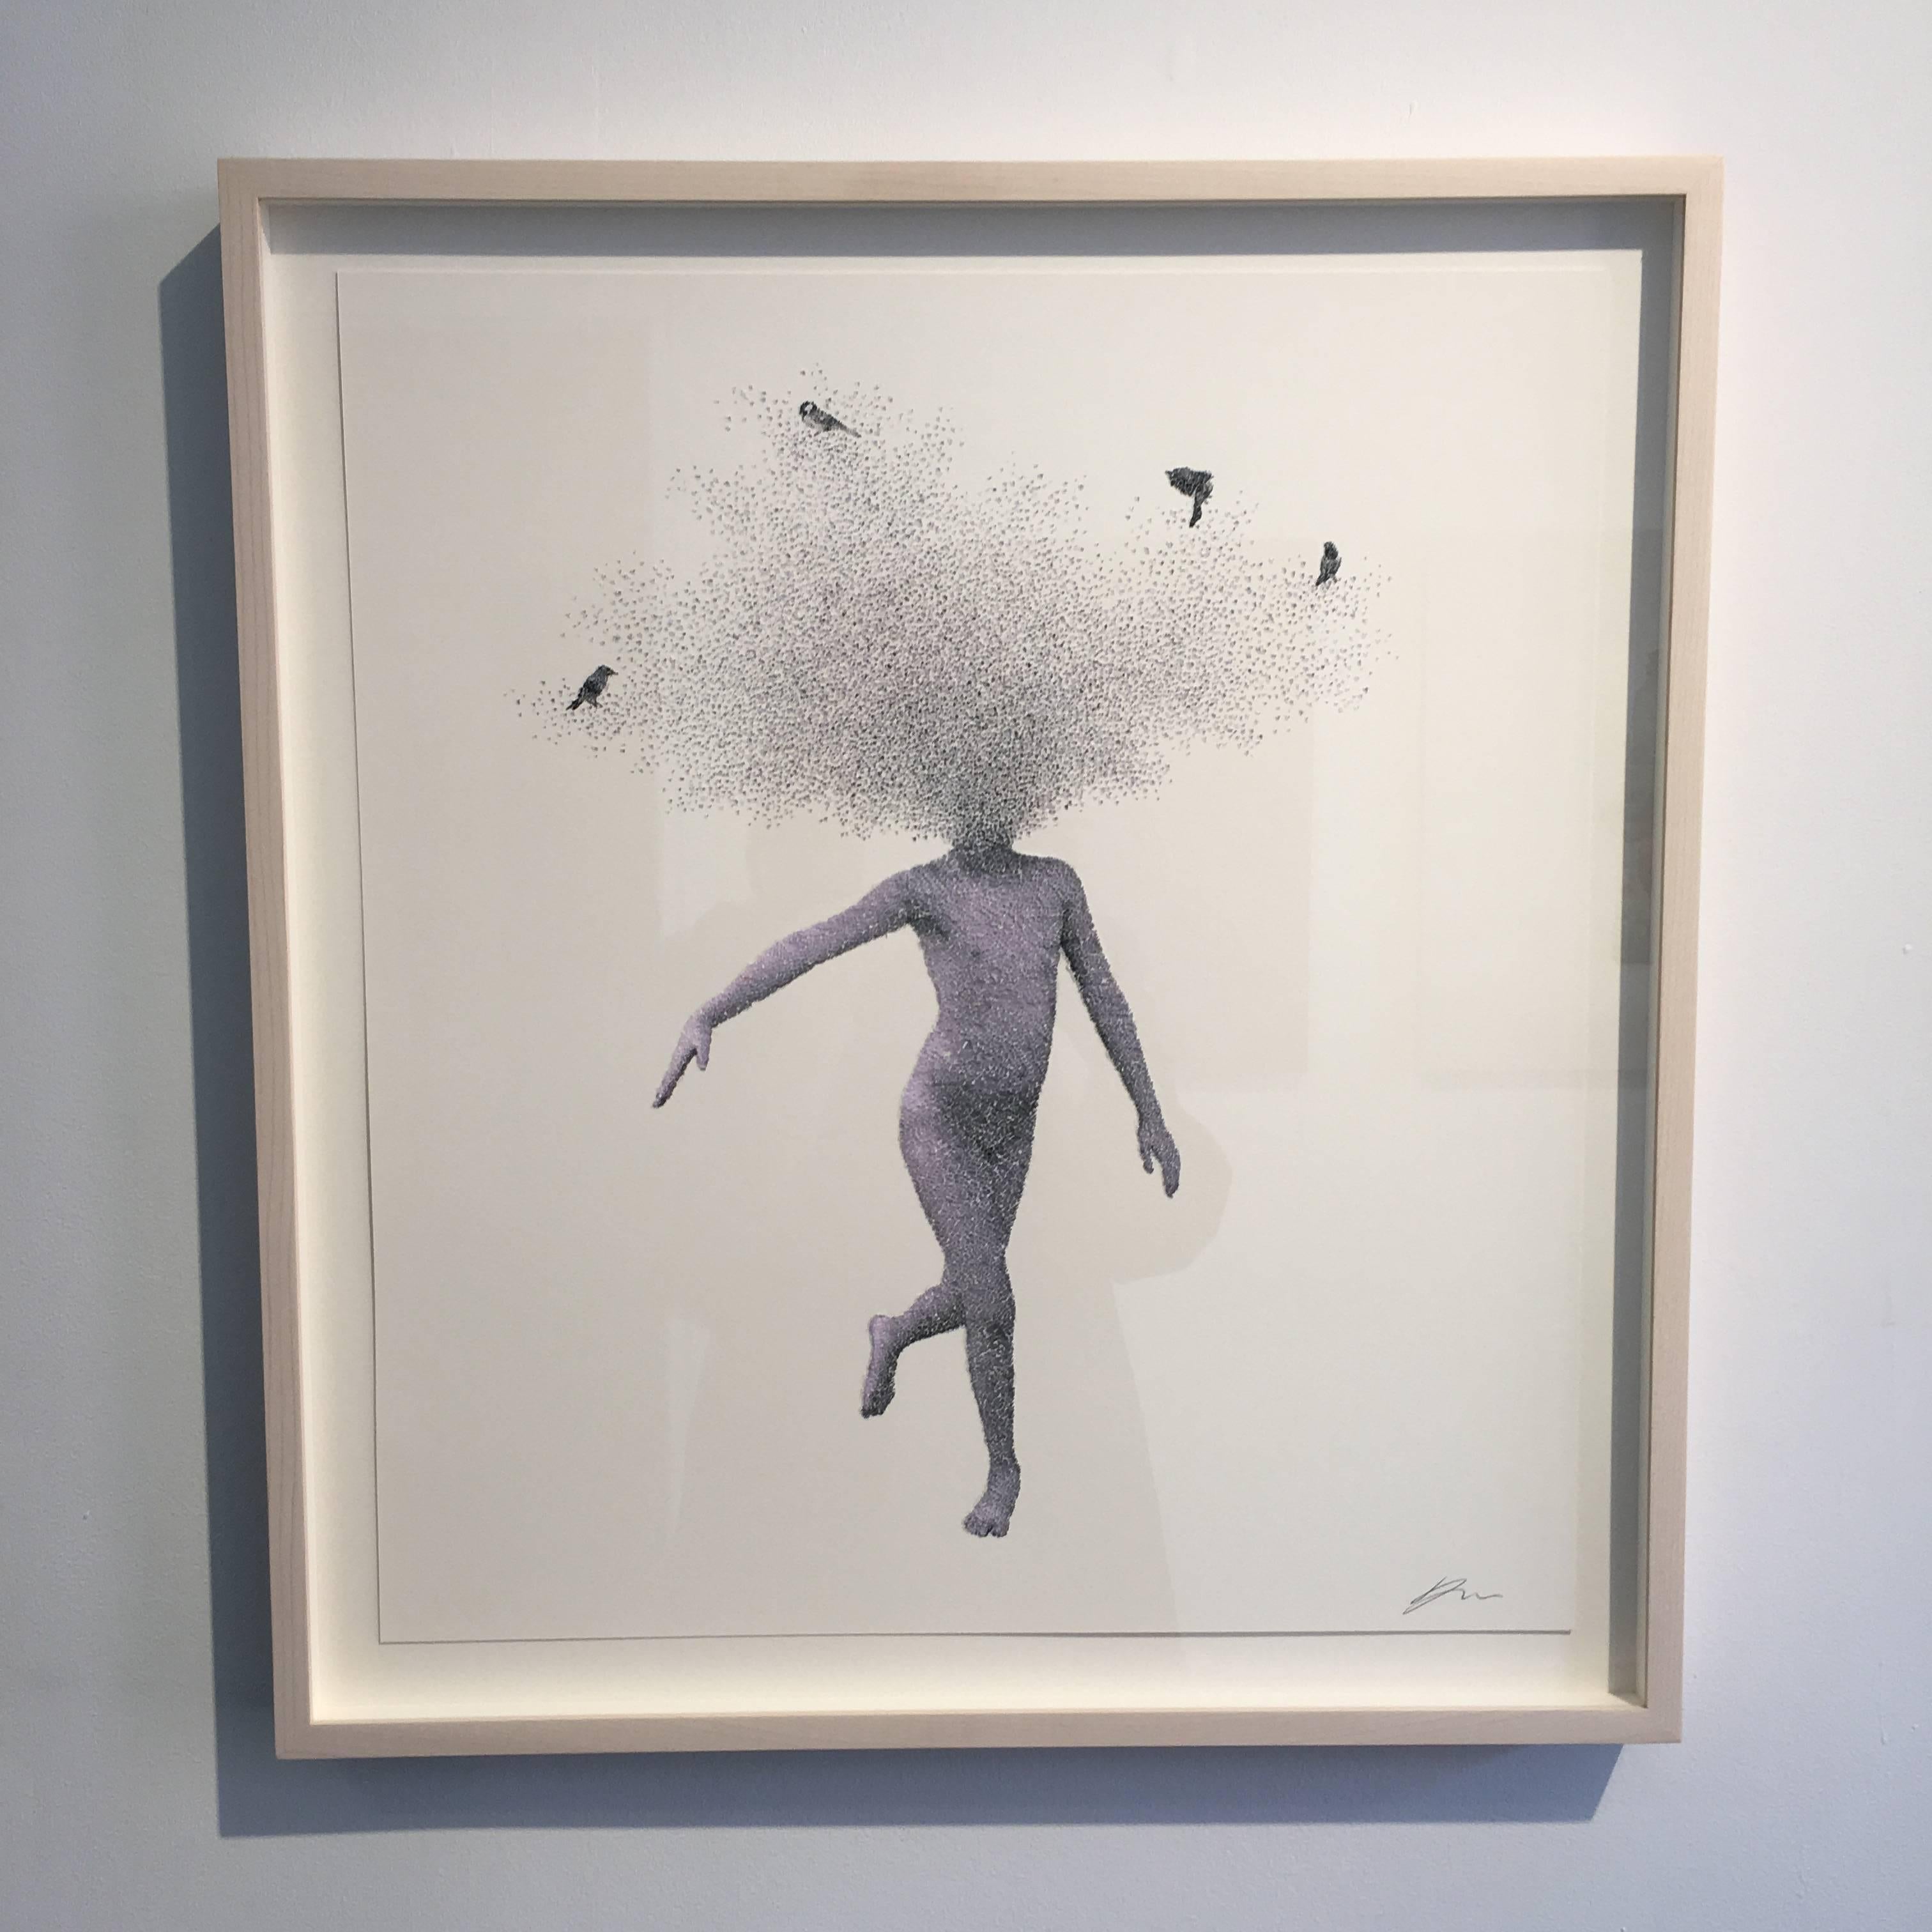 Walking on Dream  #1 - contemporary soft purple torn photograph pasted on paper - Photograph by Keun Young Park